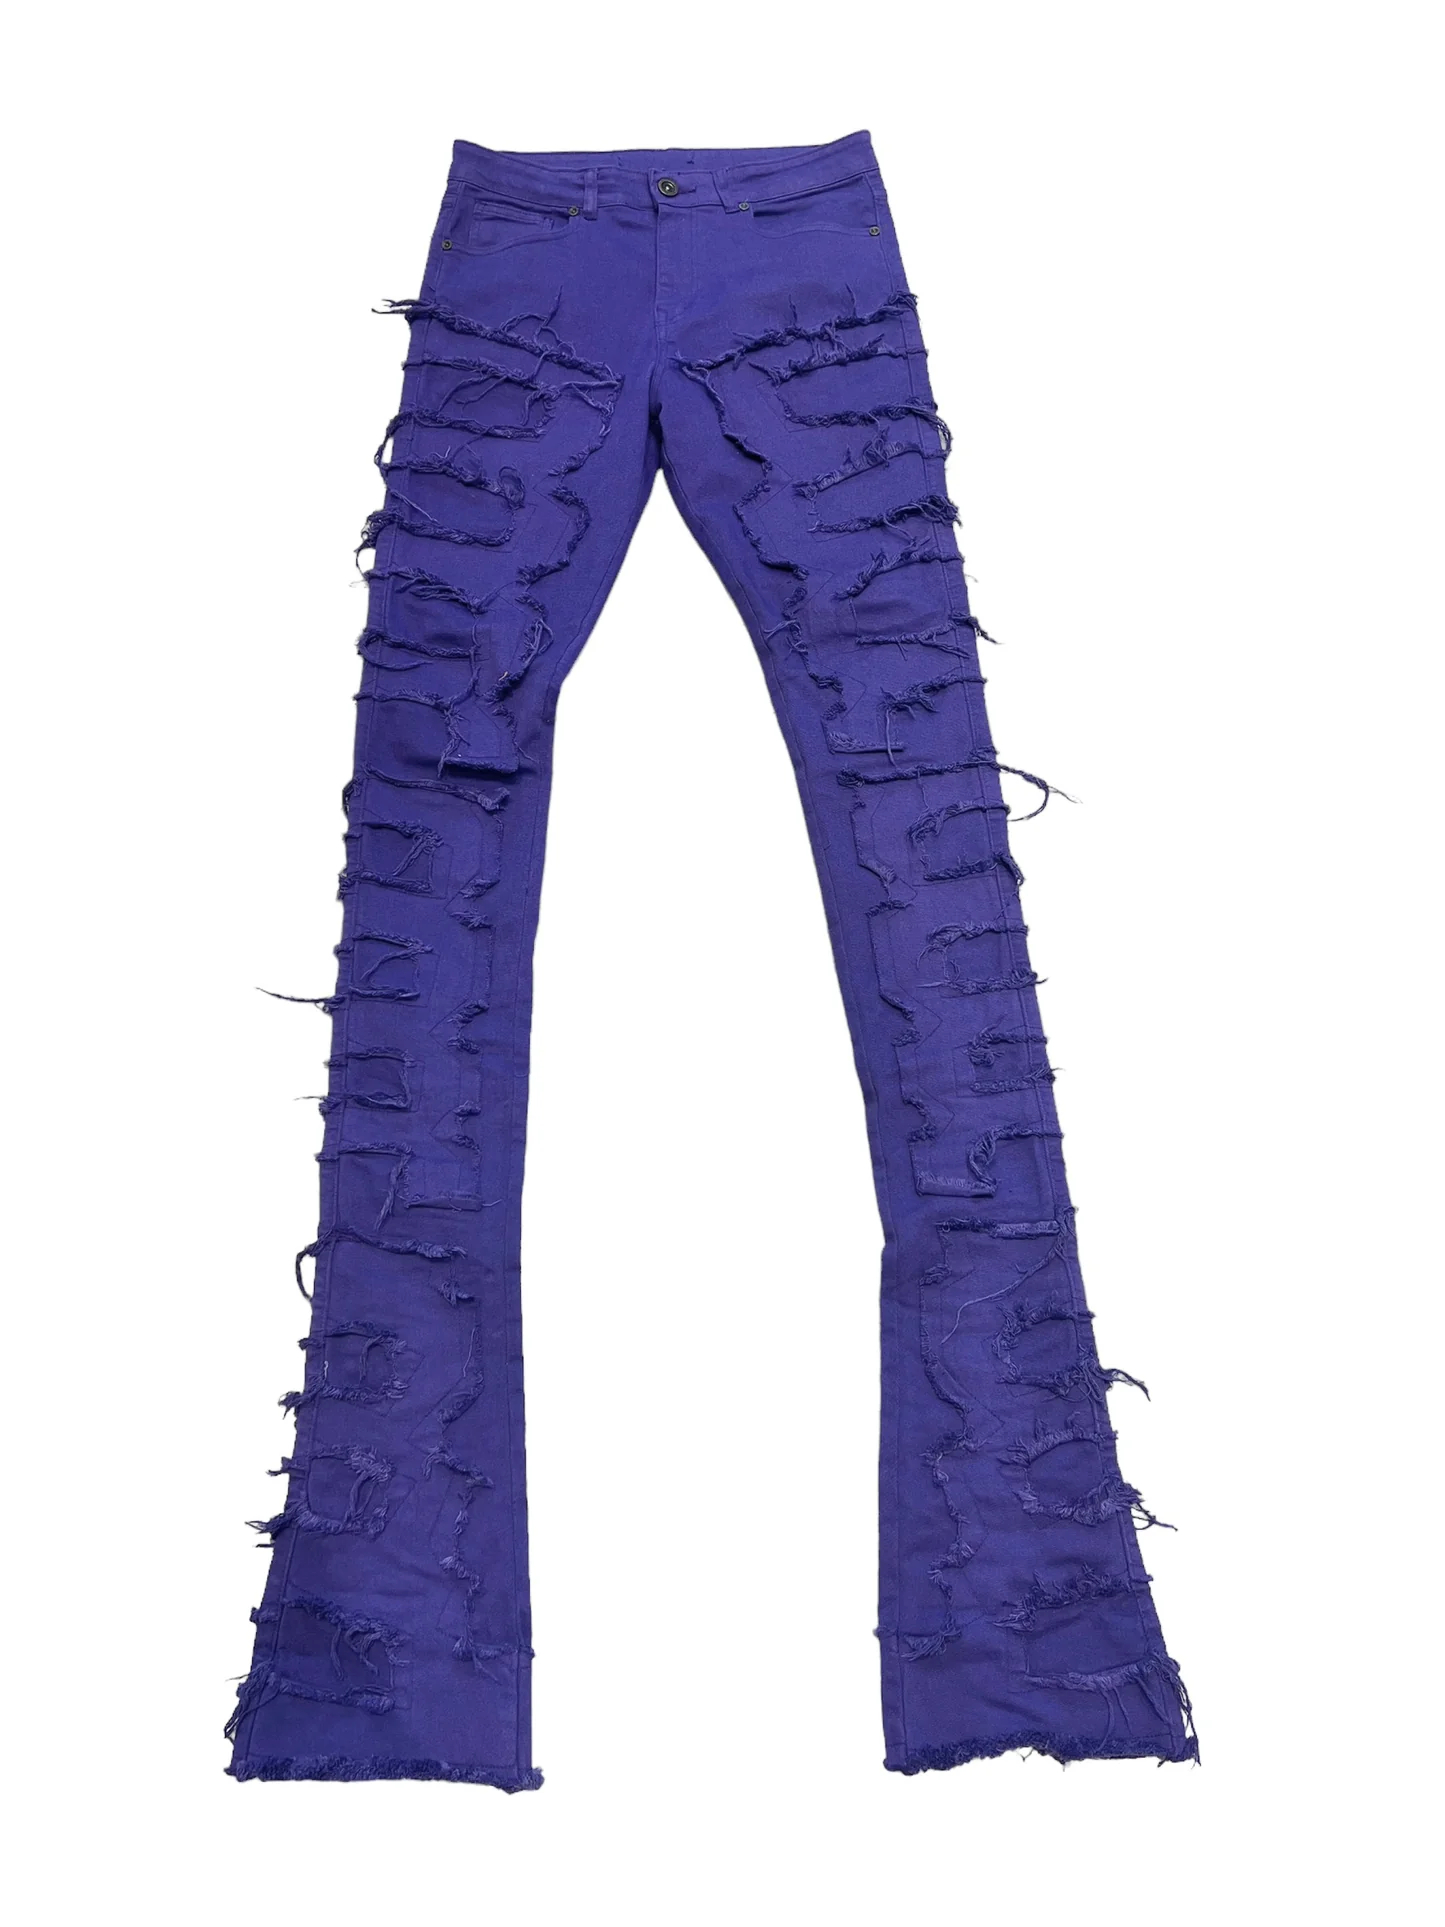 purple stacked jeans